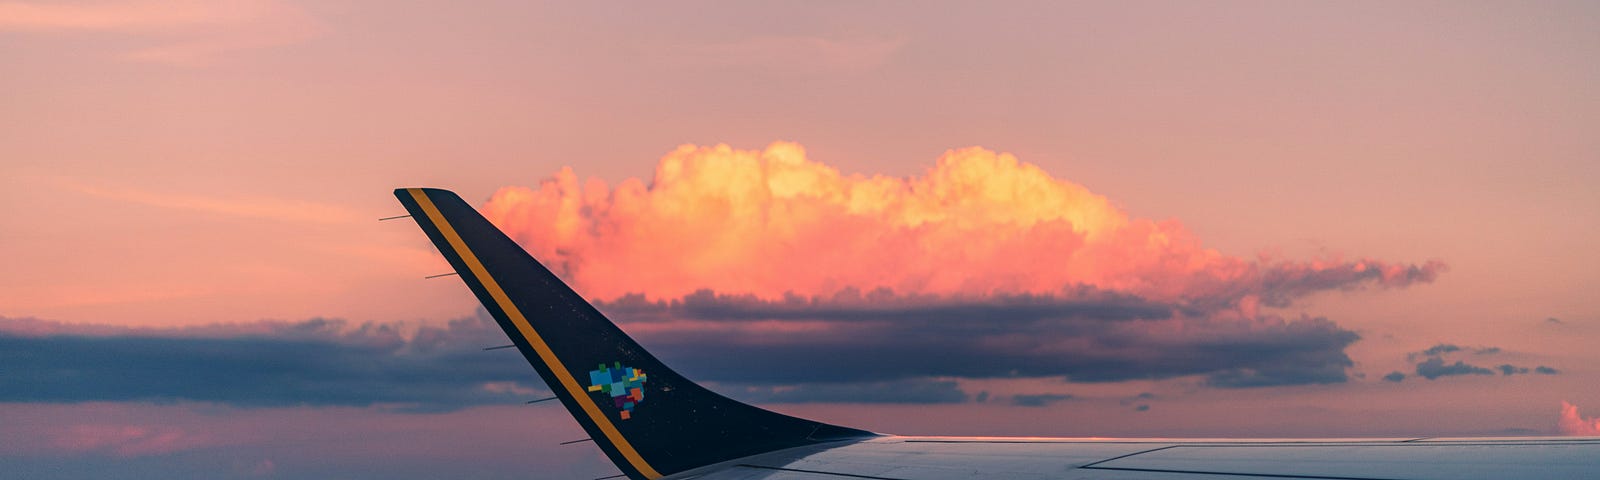 Wing of a commercial airplane at sunset